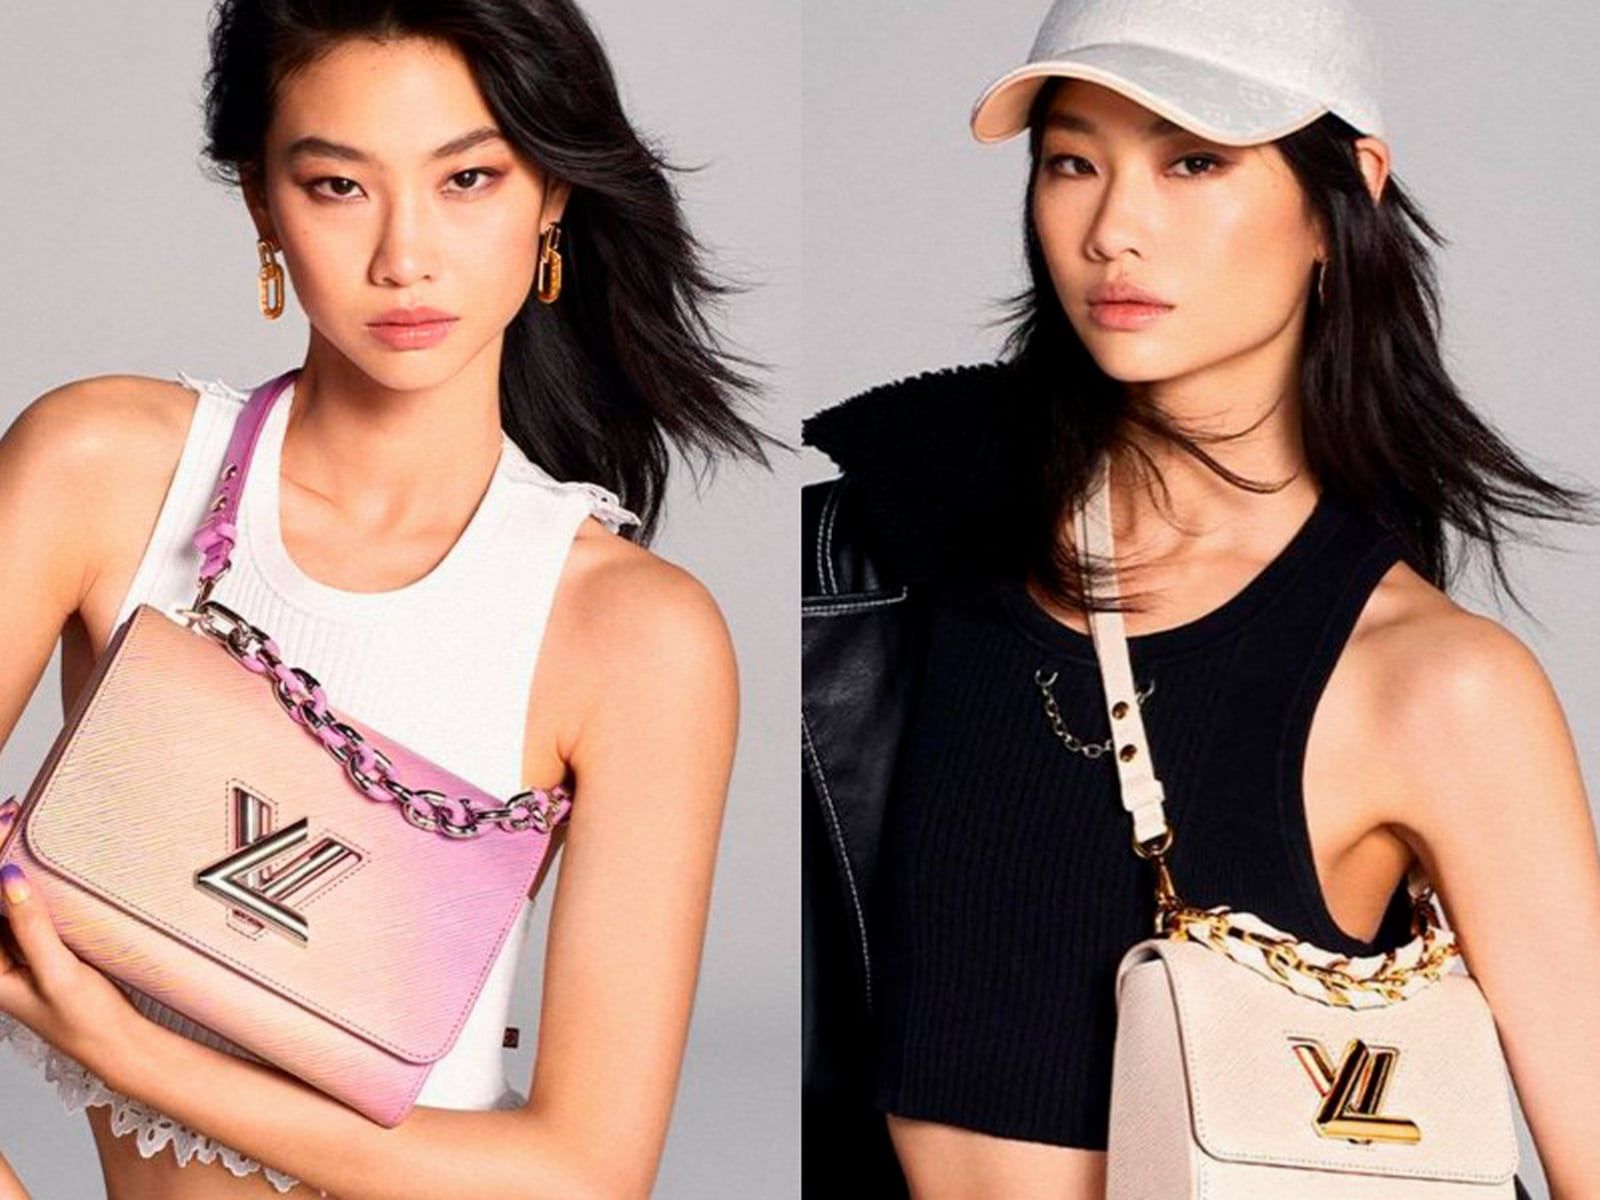 Louis Vuitton must pay almost a million dollars for copyright infringement